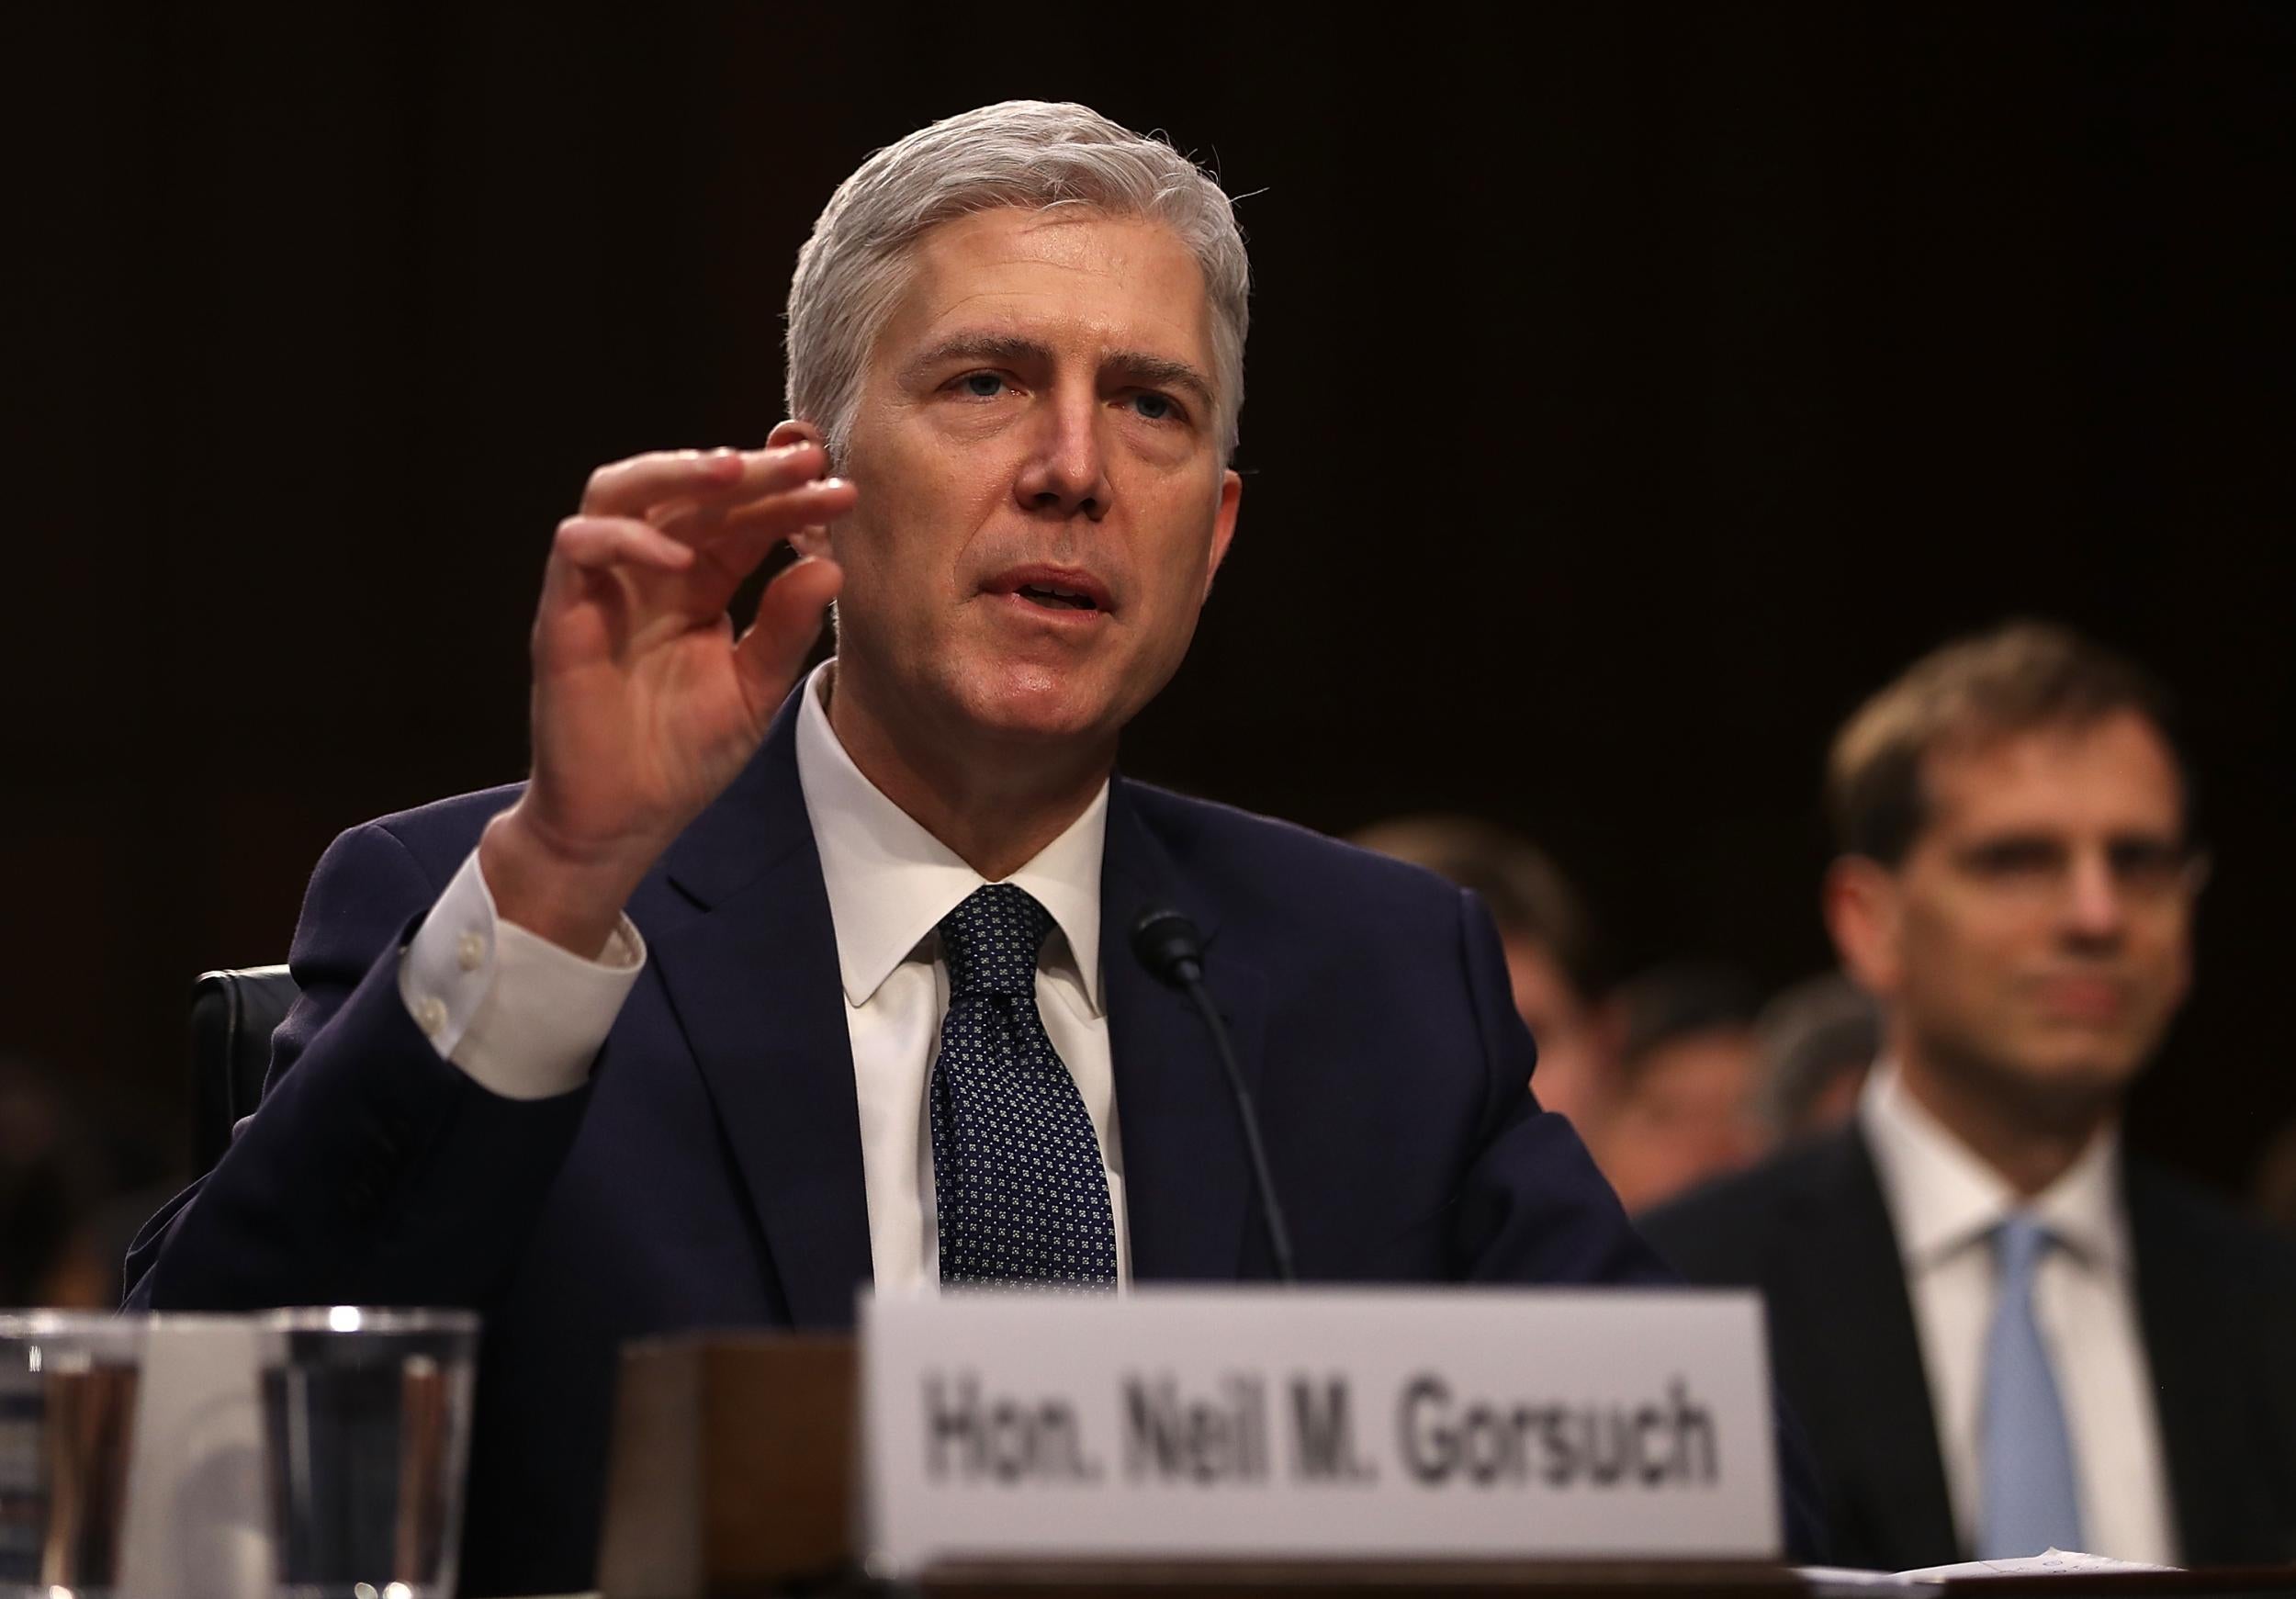 A historic rules change saw Neil Gorsuch confirmed with a final vote count of 54 in support to 45 in opposition